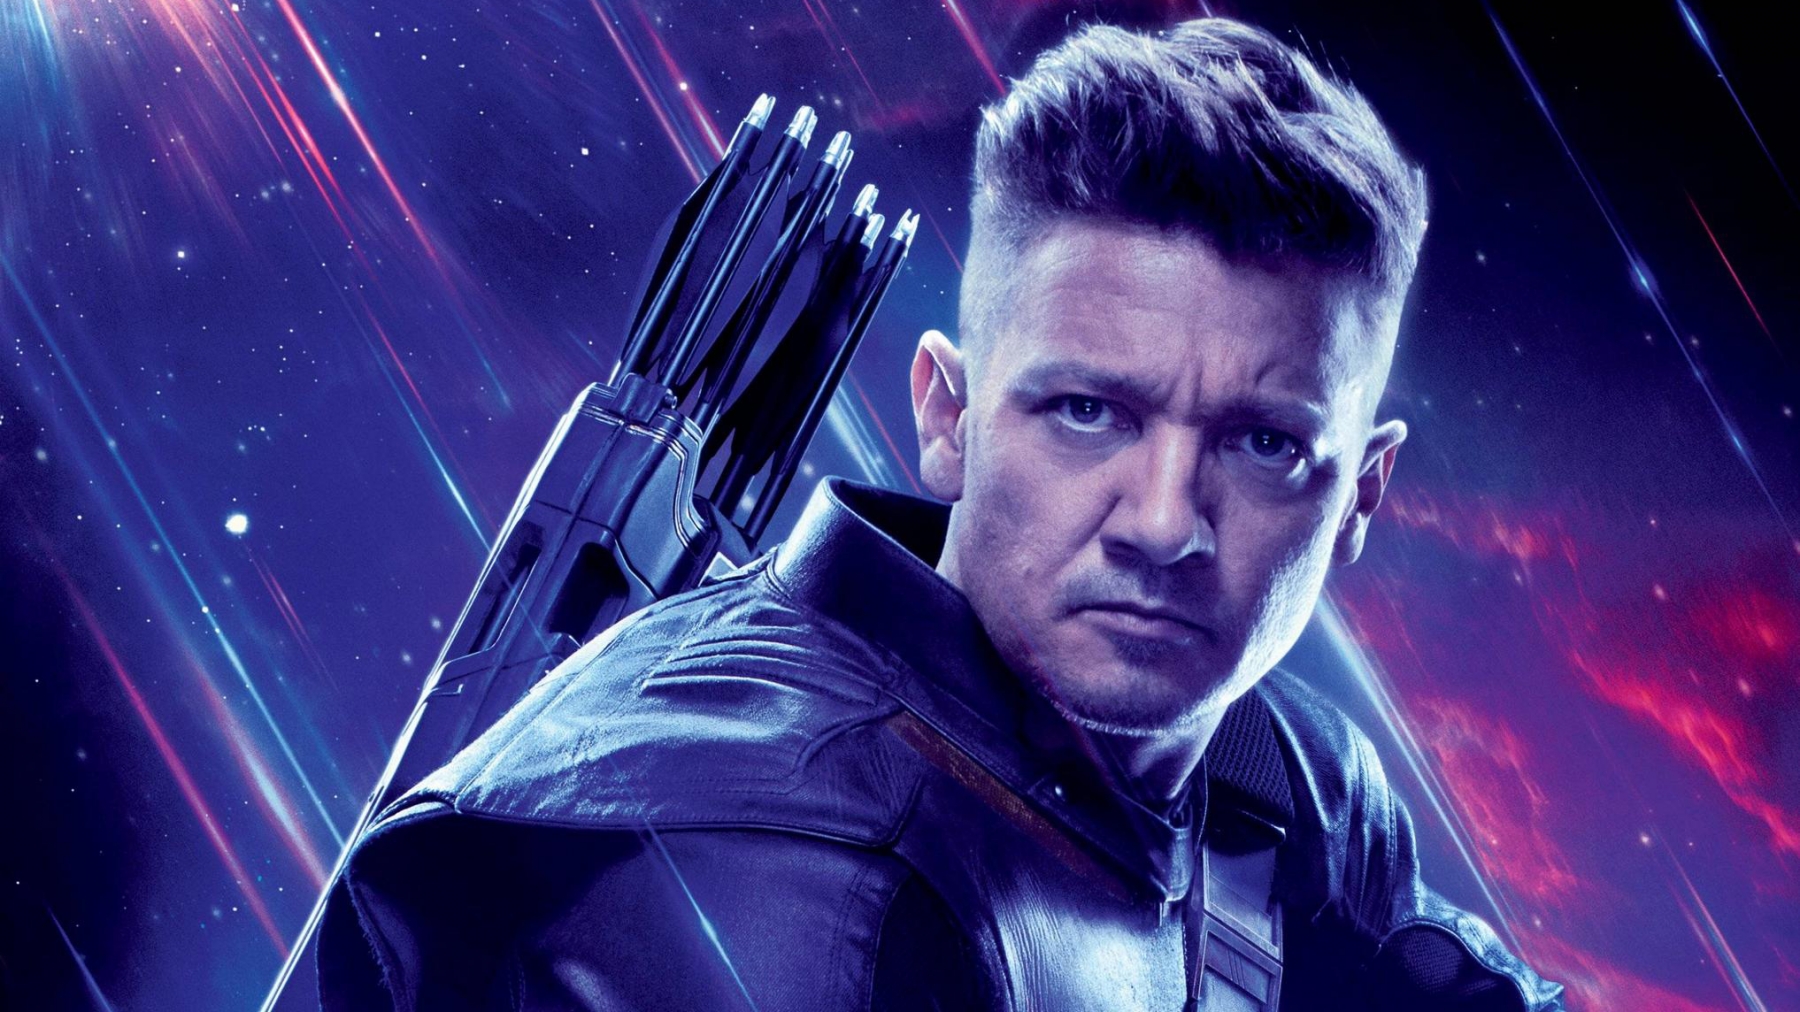 Marvel Character Hawkeye HD Wallpaper Collection Yl Puting